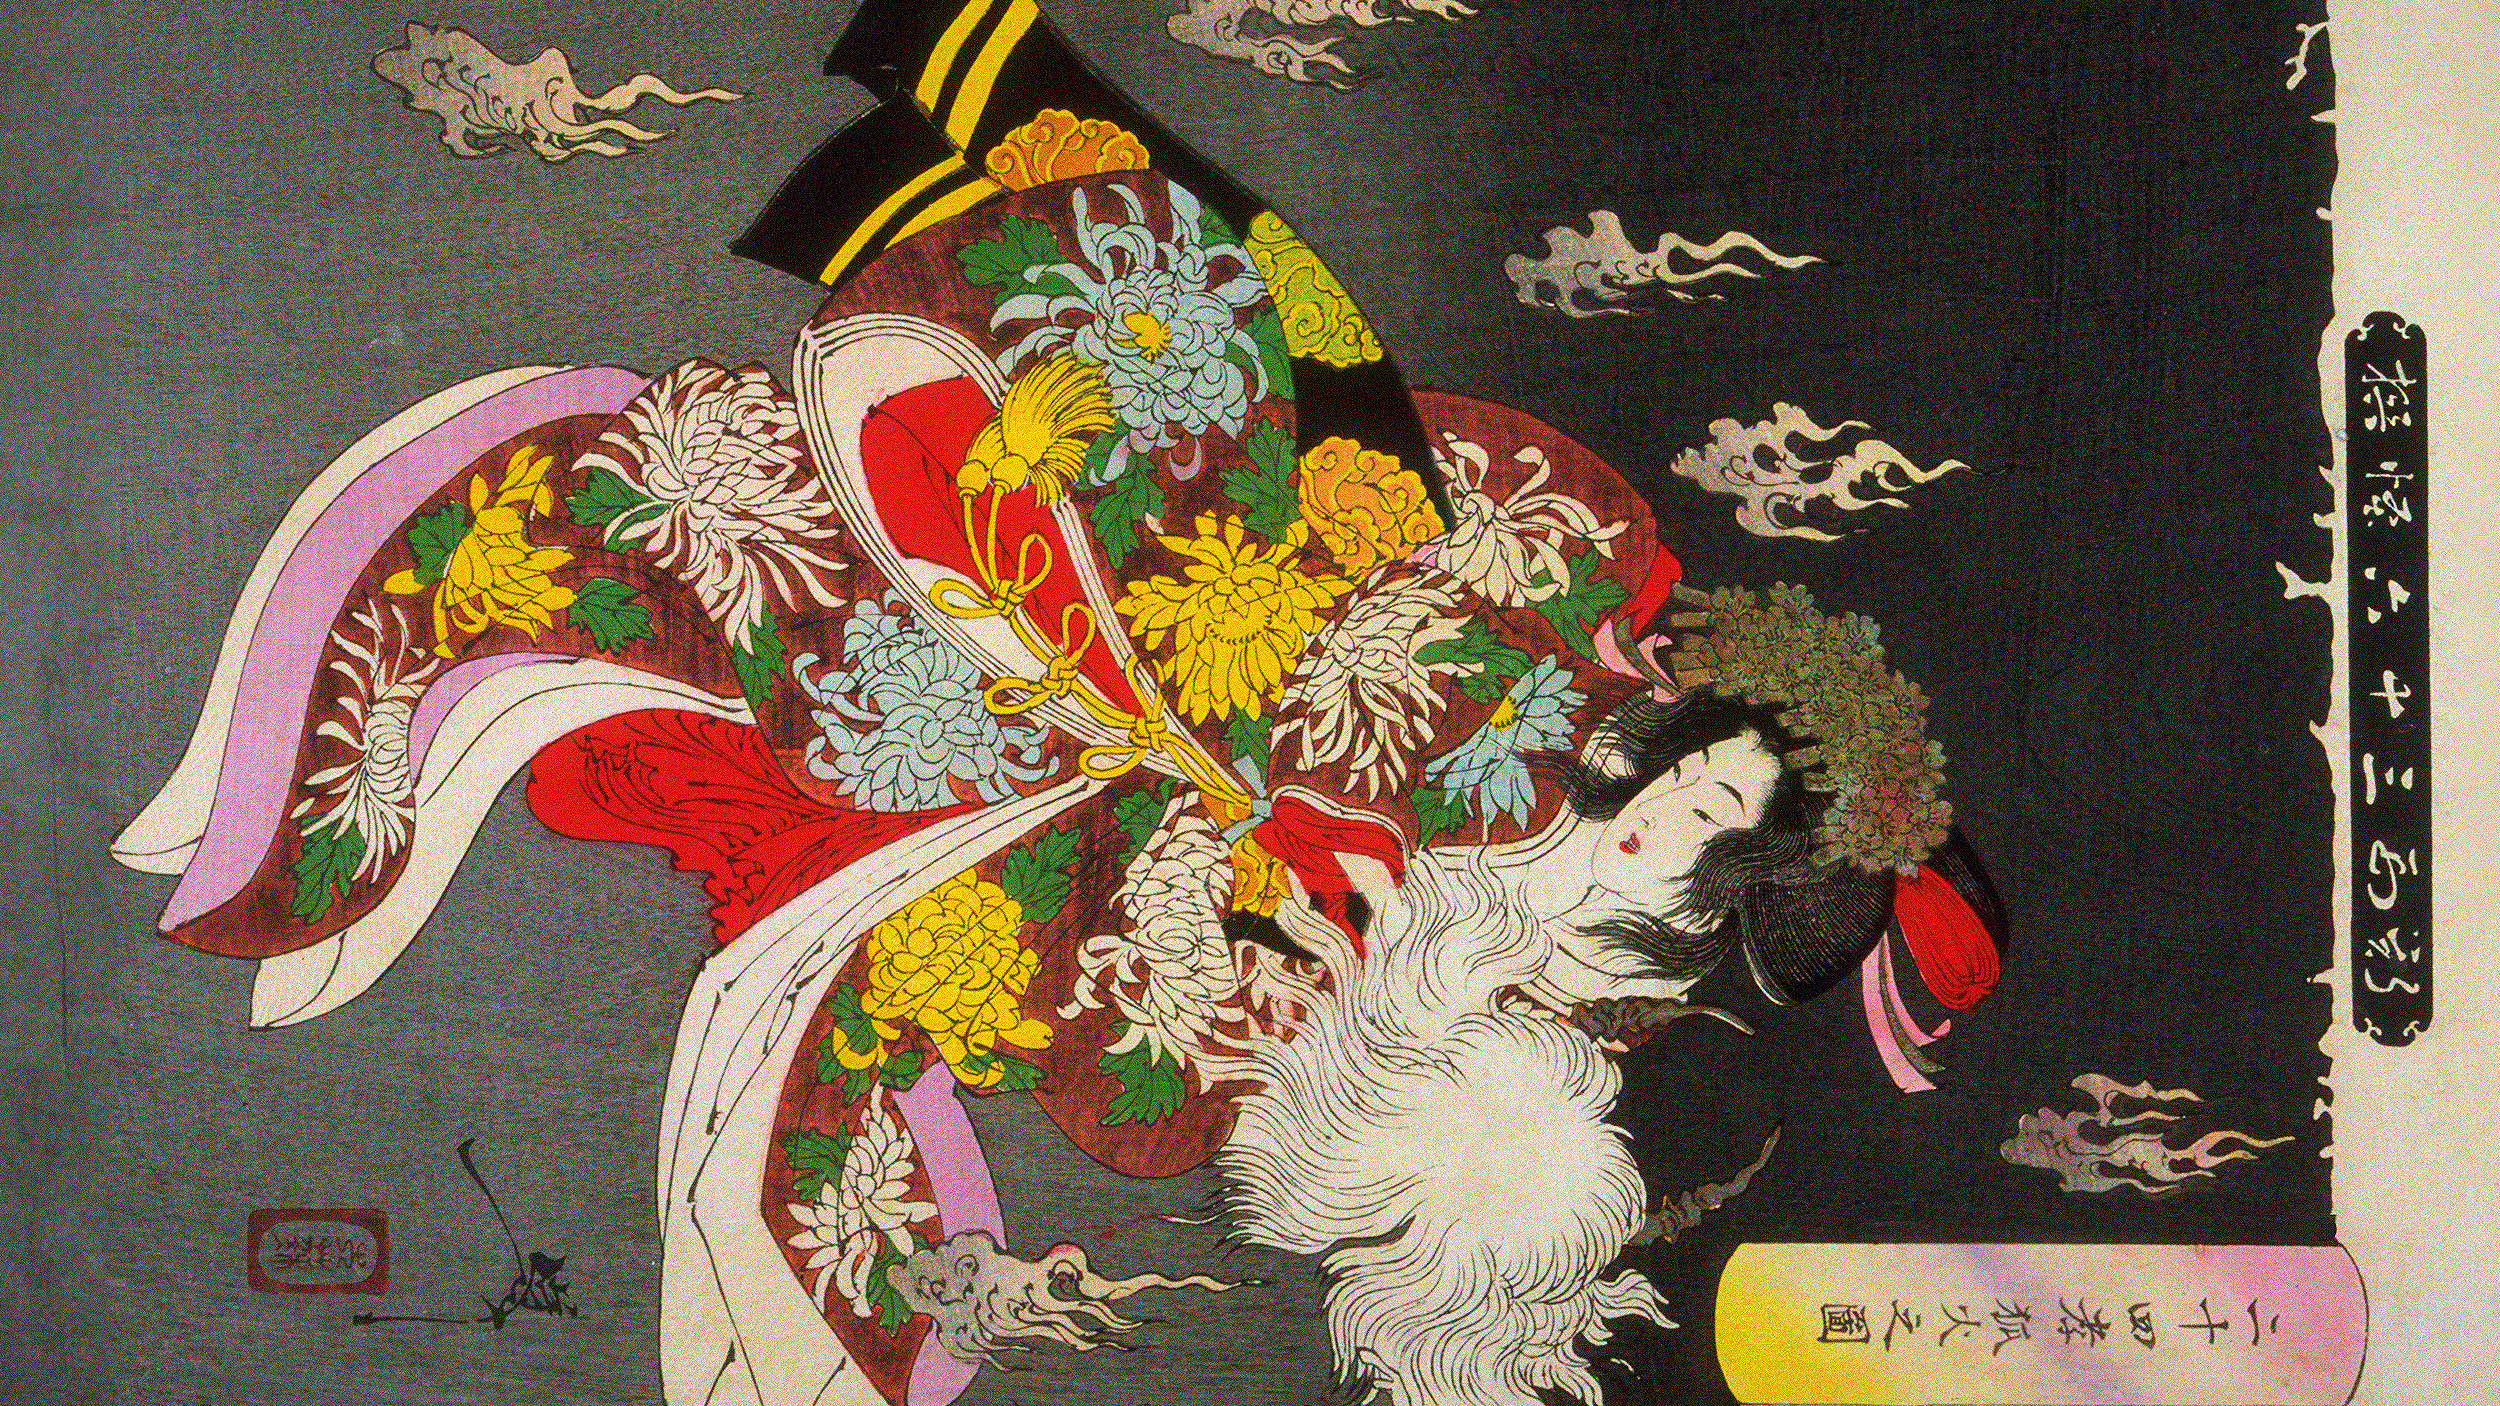 A traditional Japanese woodblock print inspired by Japanese philosophy, depicting a woman in a flowing, colorful kimono dancing gracefully against a dark background with cloud motifs.